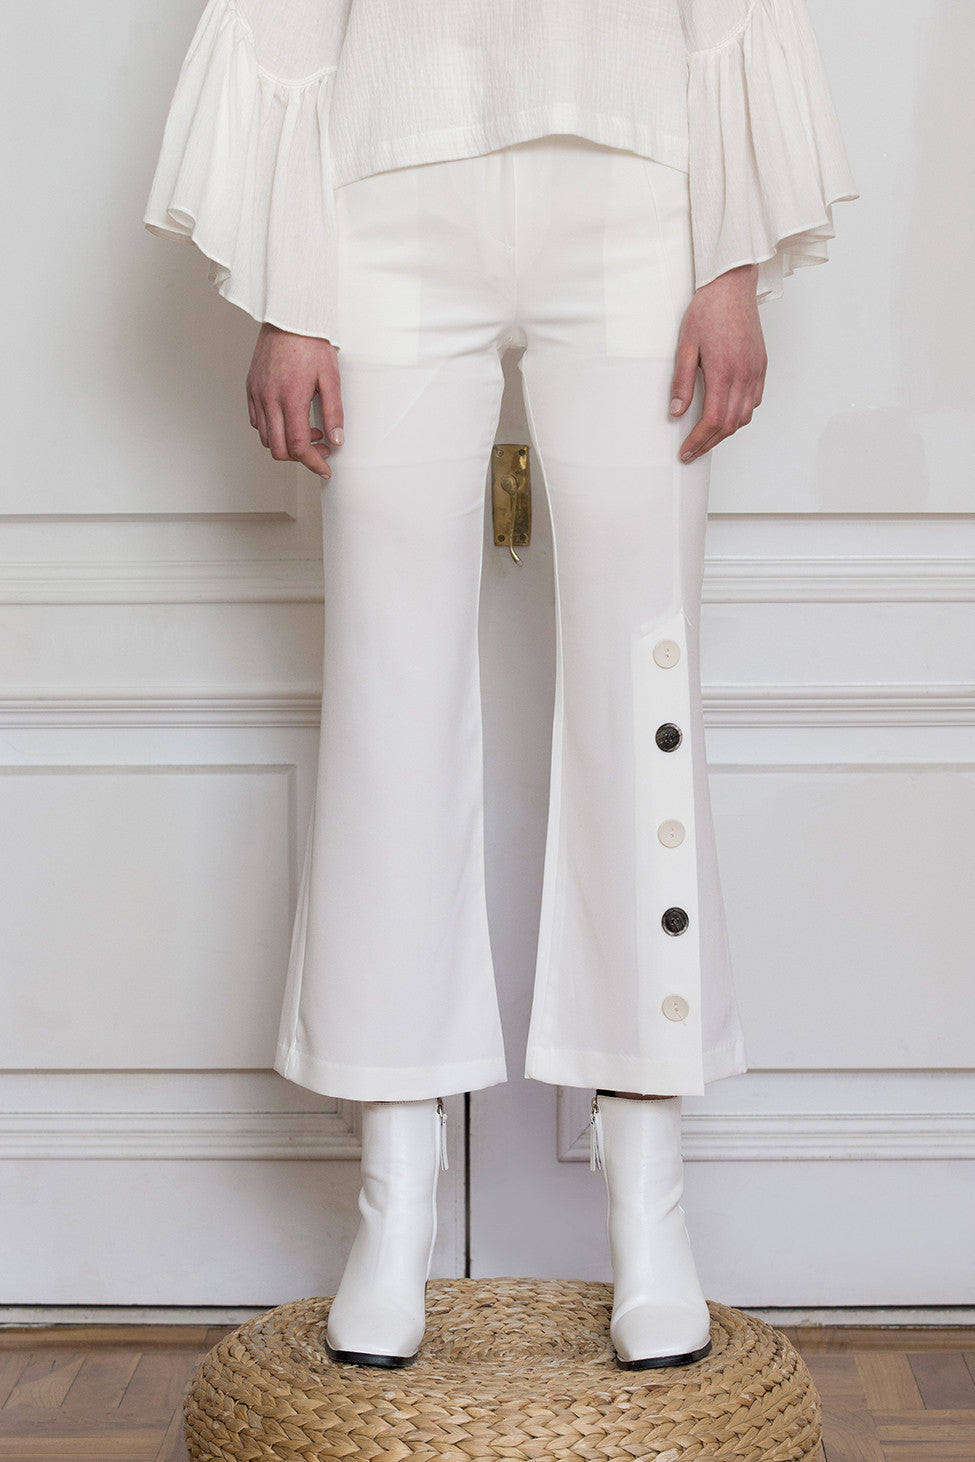 The Adalyn Pant in White featuring on-seam zip fly and hook closure, slanted front pockets, decorative button detail down left side. Partially lined. Cropped silhouette. 